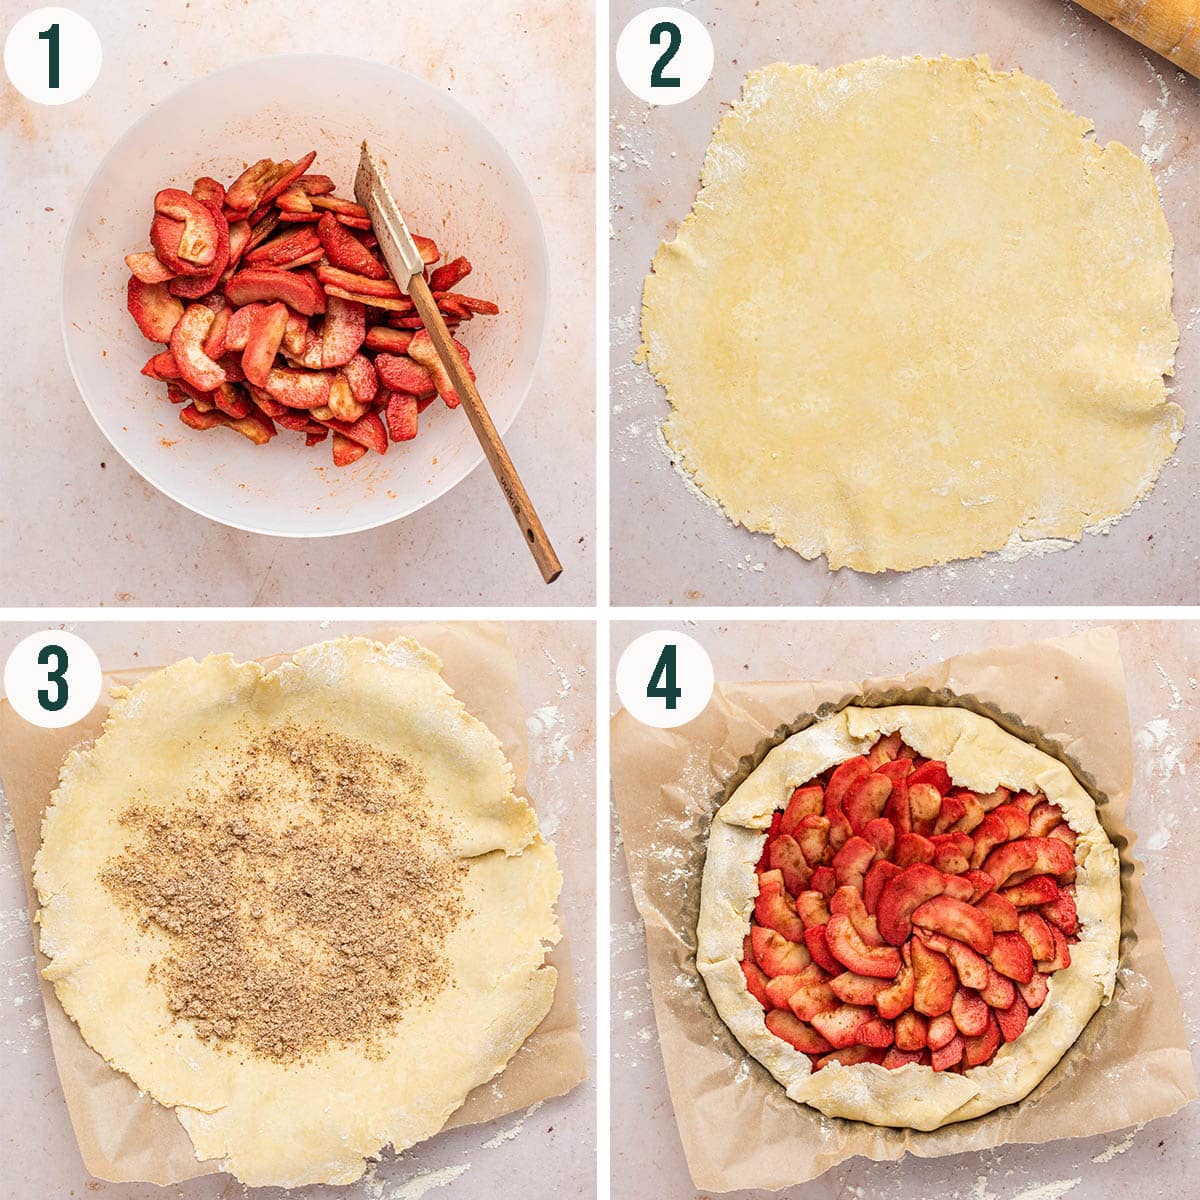 Apple galette steps 1 to 4, mixing the apples, rolling out the pastry, and filling it.